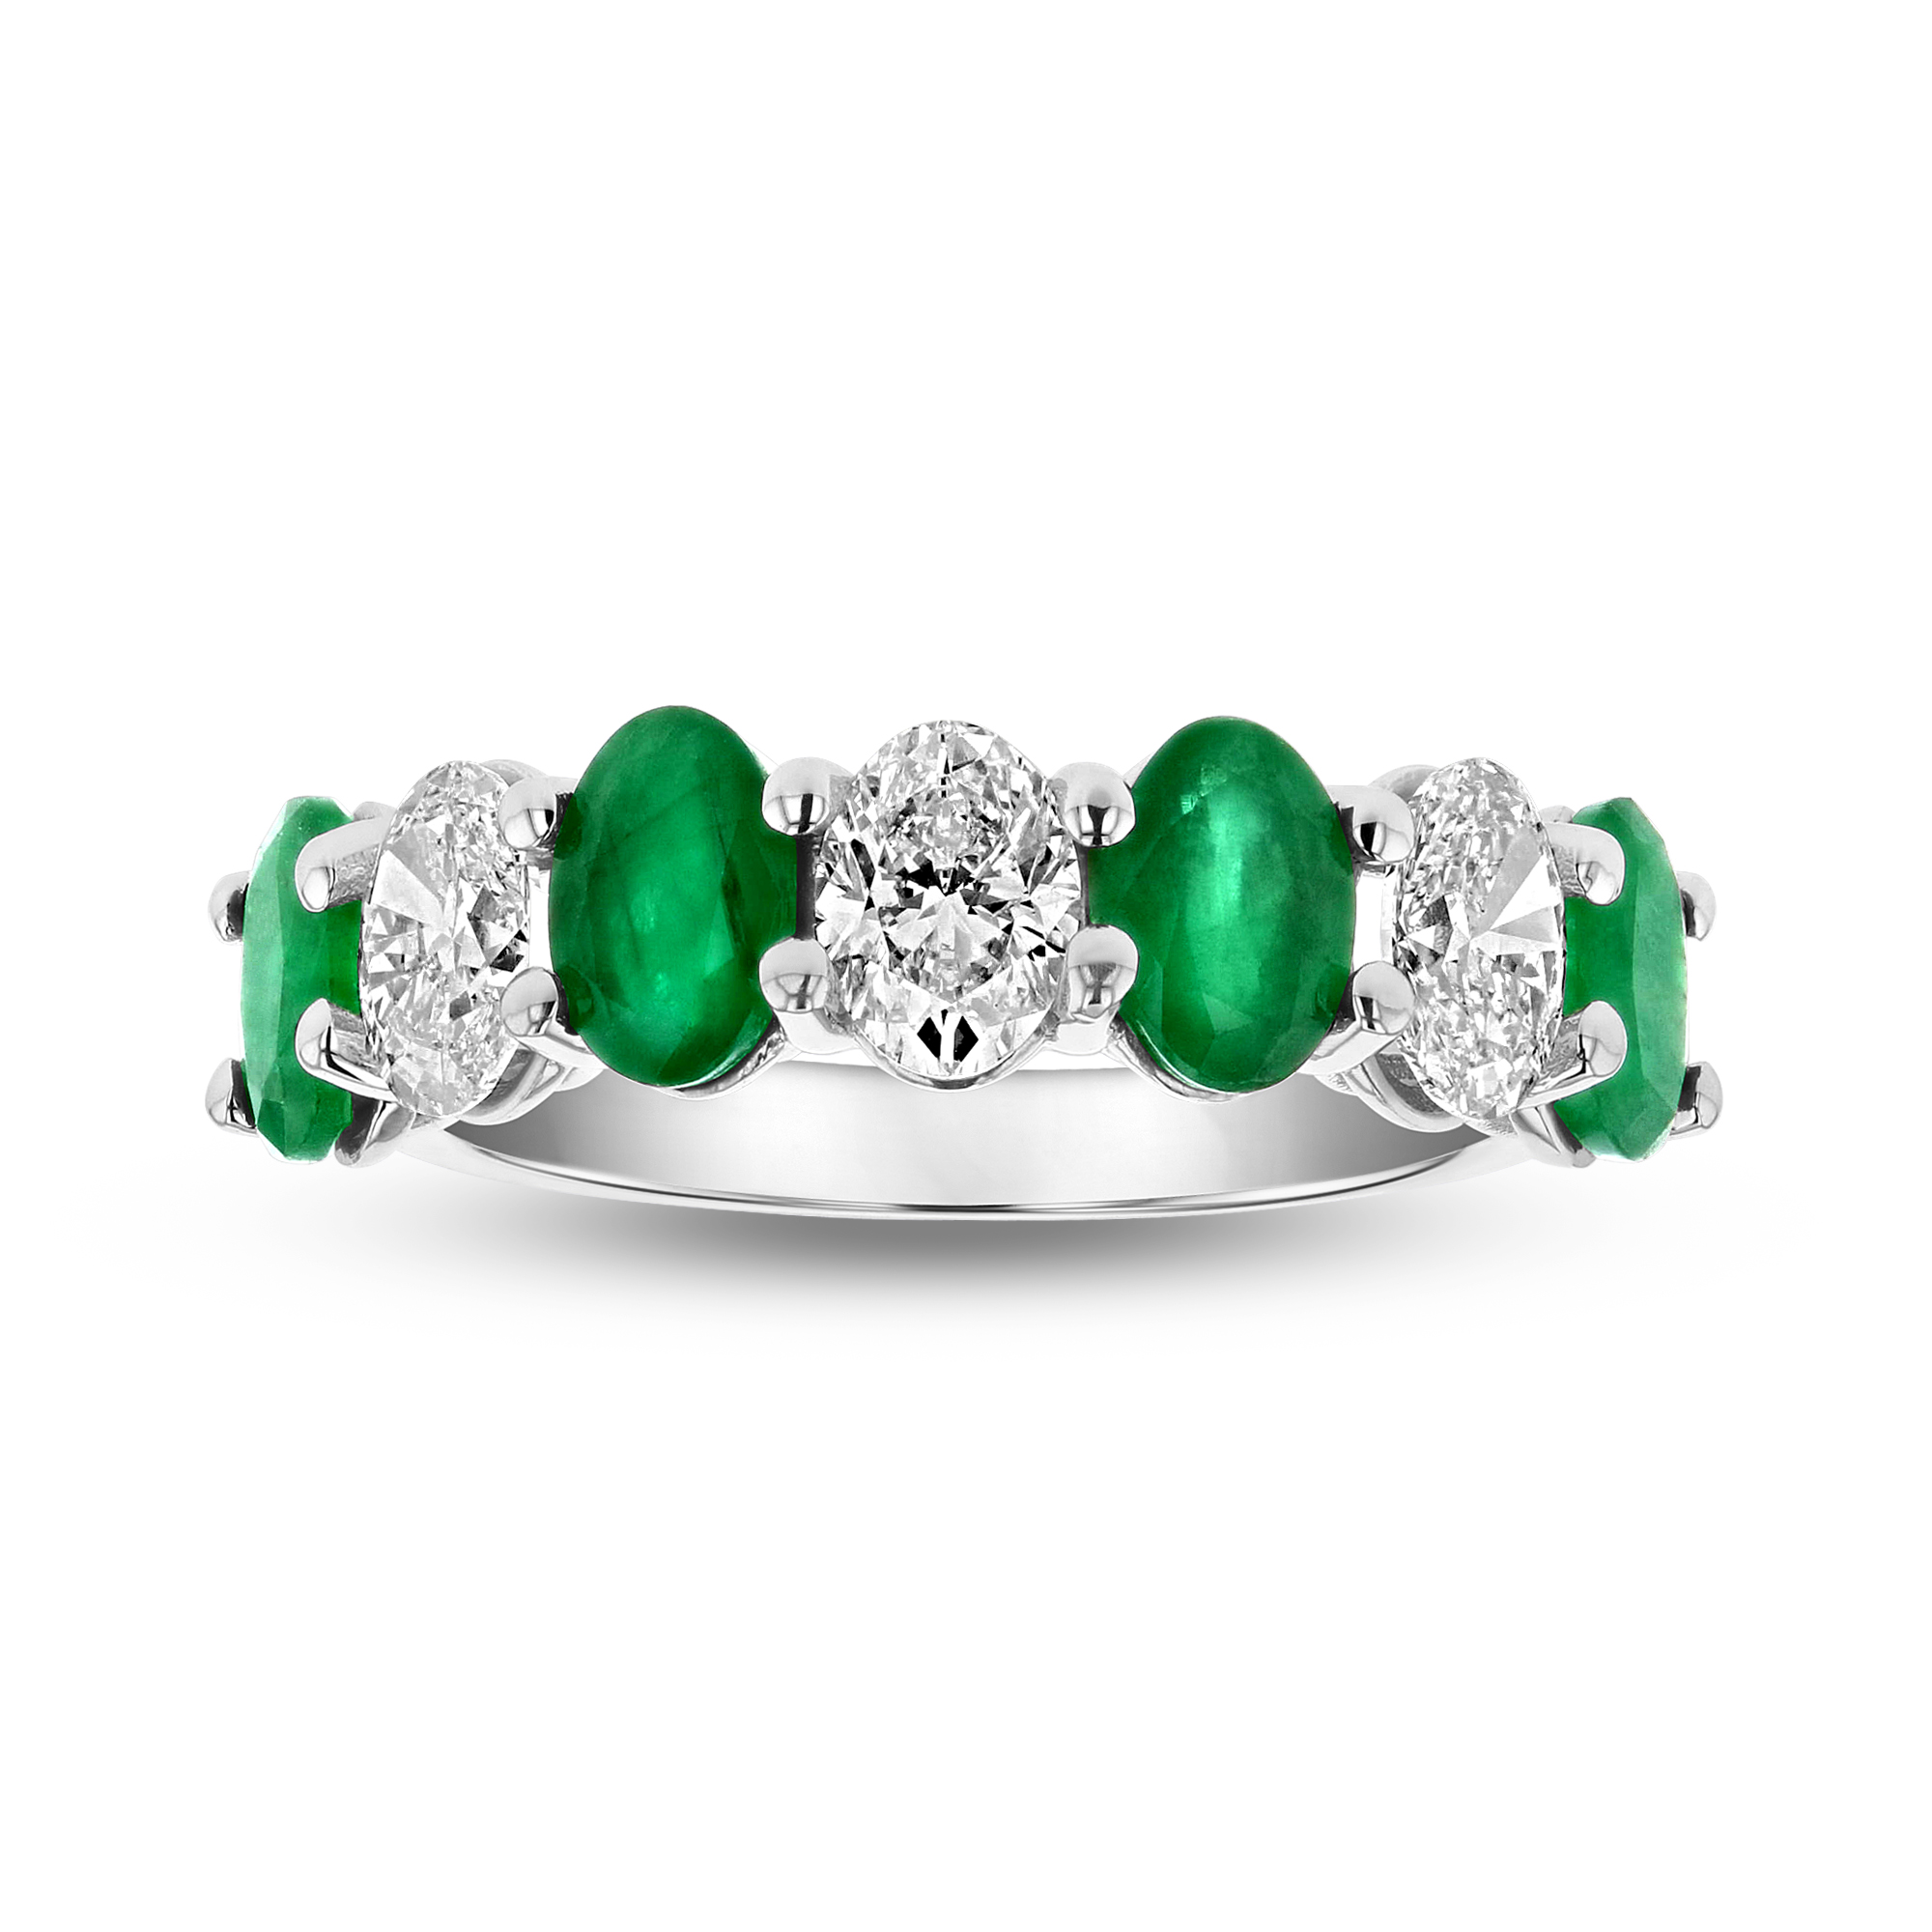 2.91ctw Diamond and Emerald Band in 14k White Gold